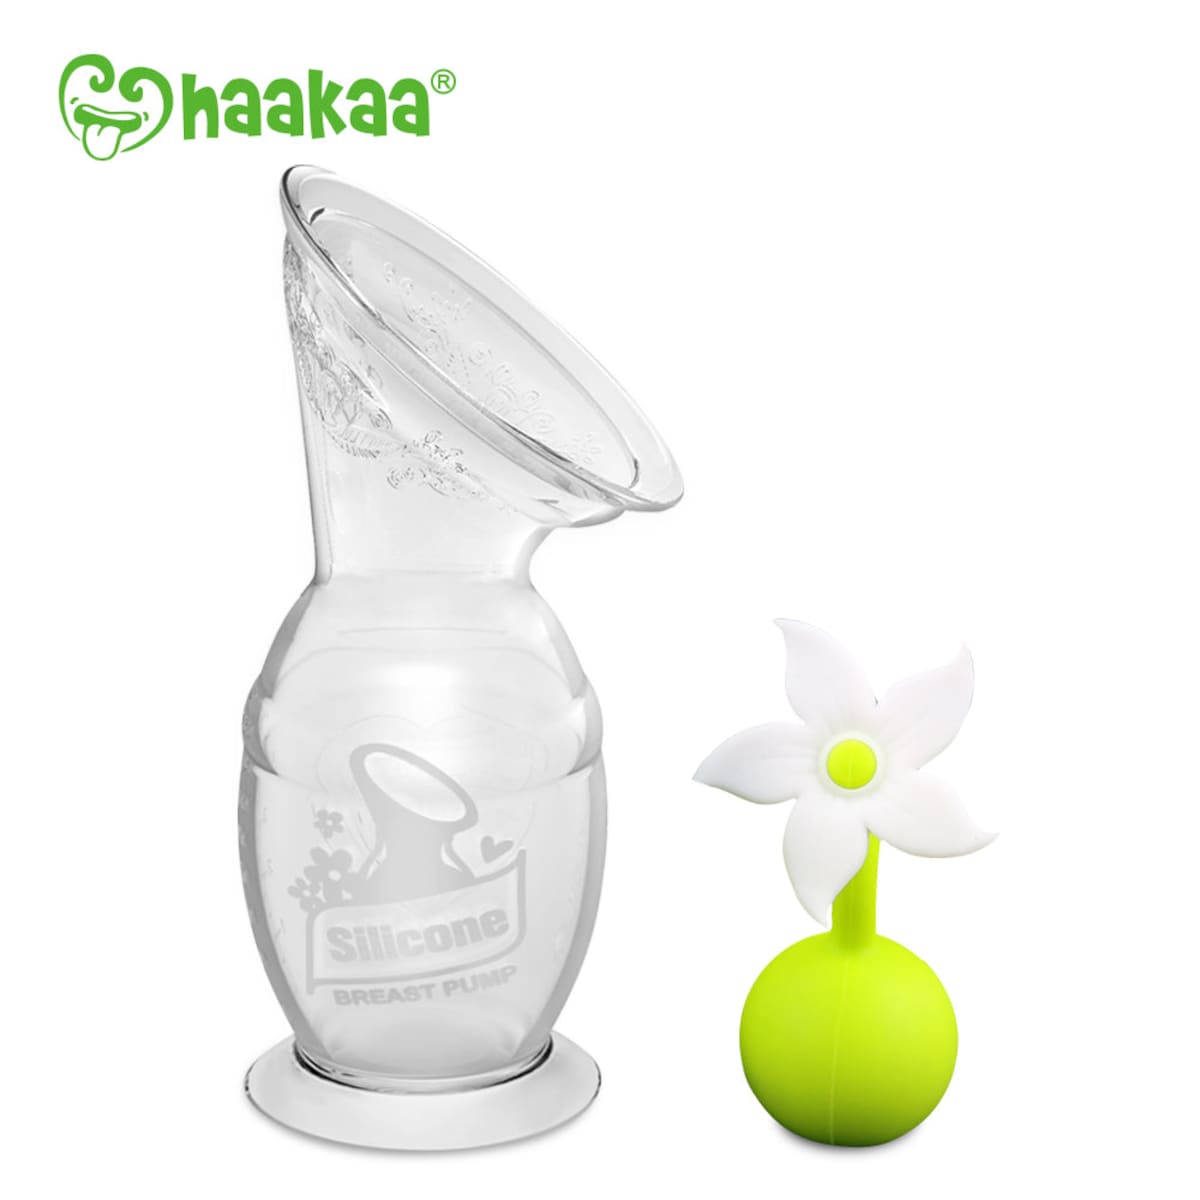 Haakaa Silicone Breast Pump and White Flower Stopper Set 150ml